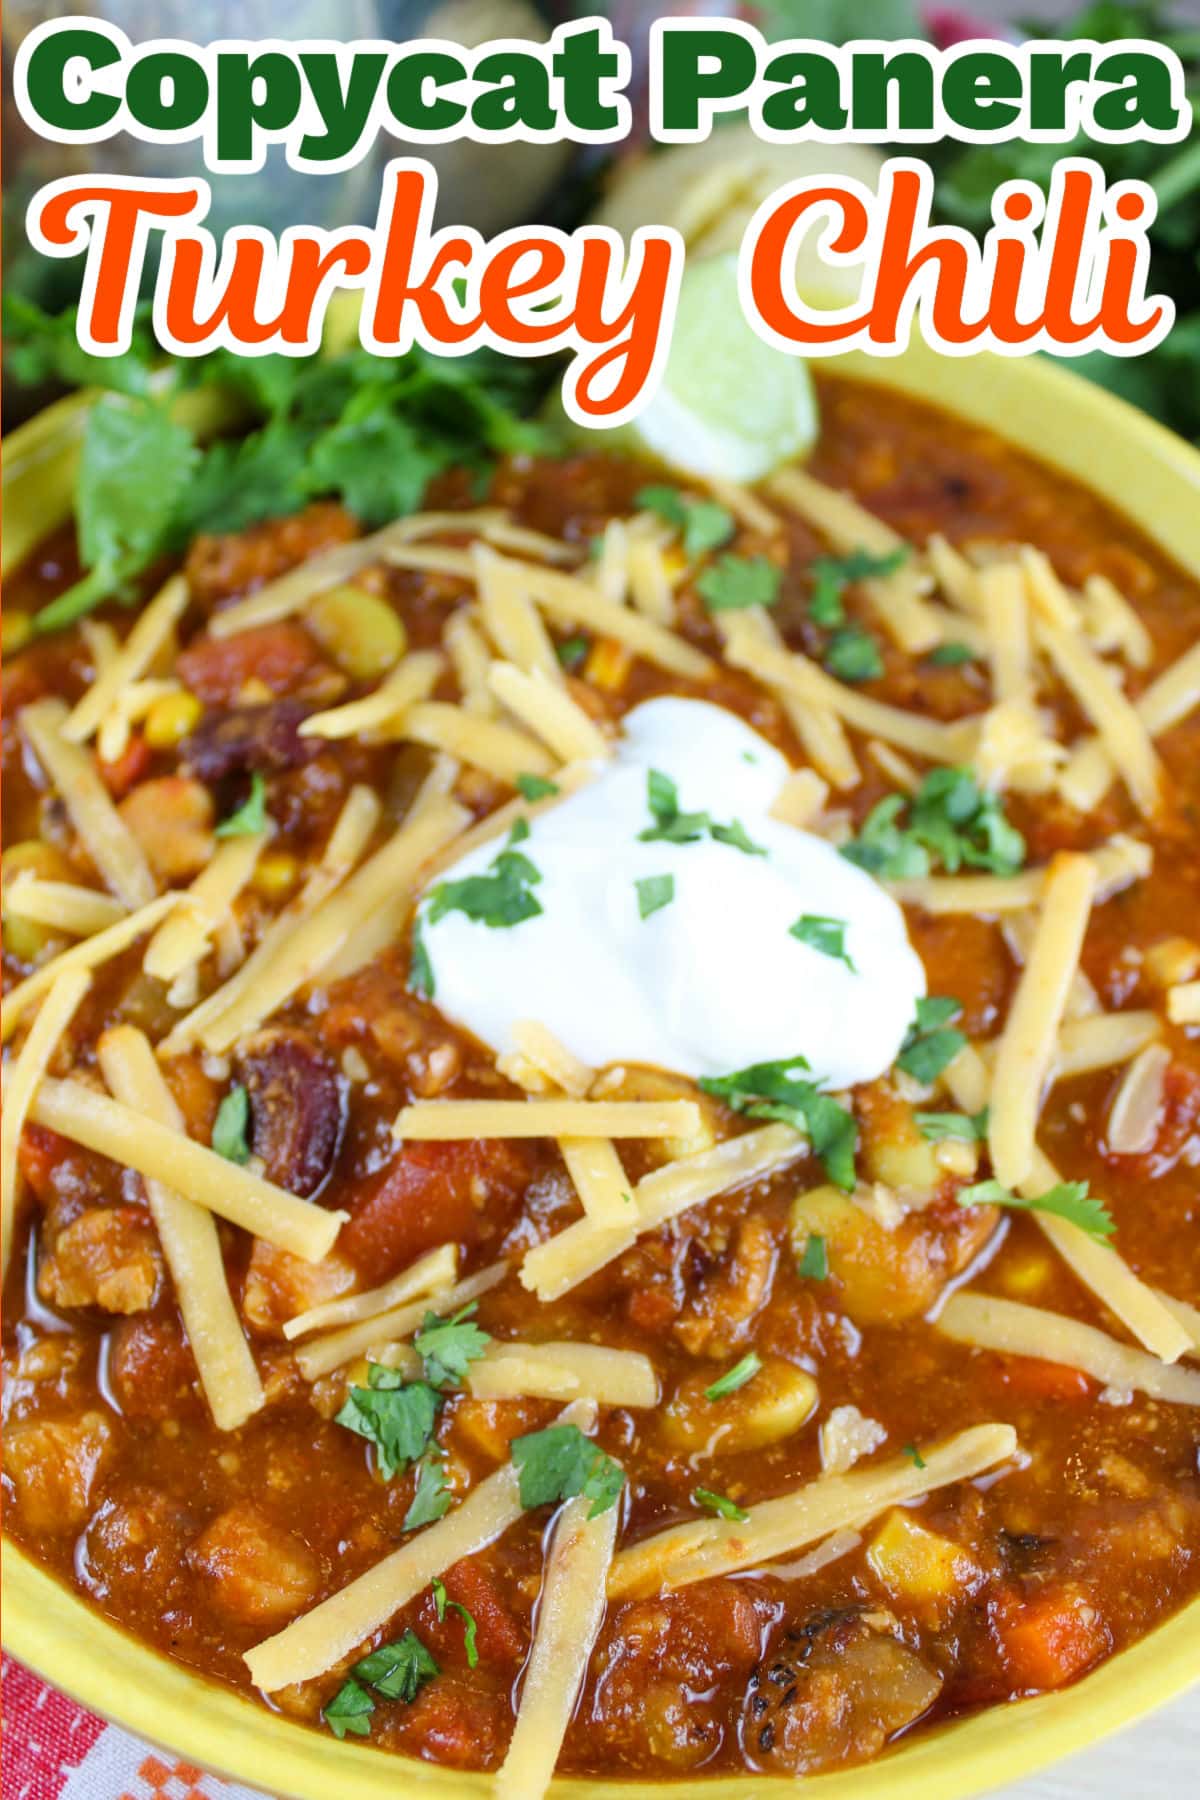 Panera Turkey Chili is a favorite in our house! You can make this hearty, chunky chili at home in no time! Filled with 10 different vegetables along with ground turkey - you will love every bite and it will taste just like the restaurant version! via @foodhussy